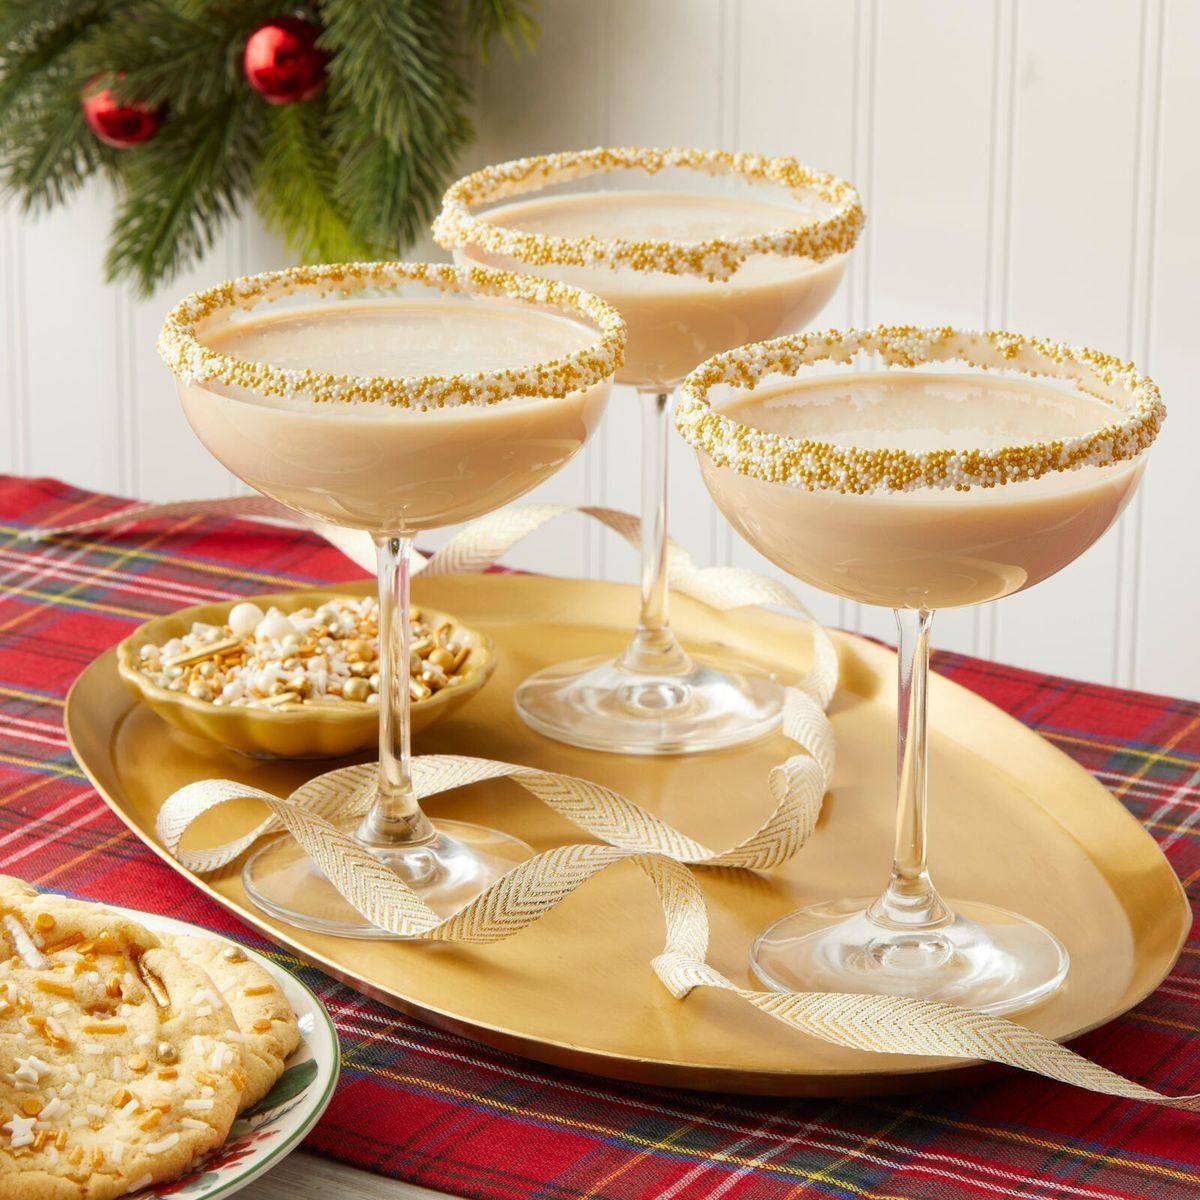 https://hips.hearstapps.com/hmg-prod/images/new-years-eve-drinks-sugar-cookie-martini-658c521d6aed4.jpeg